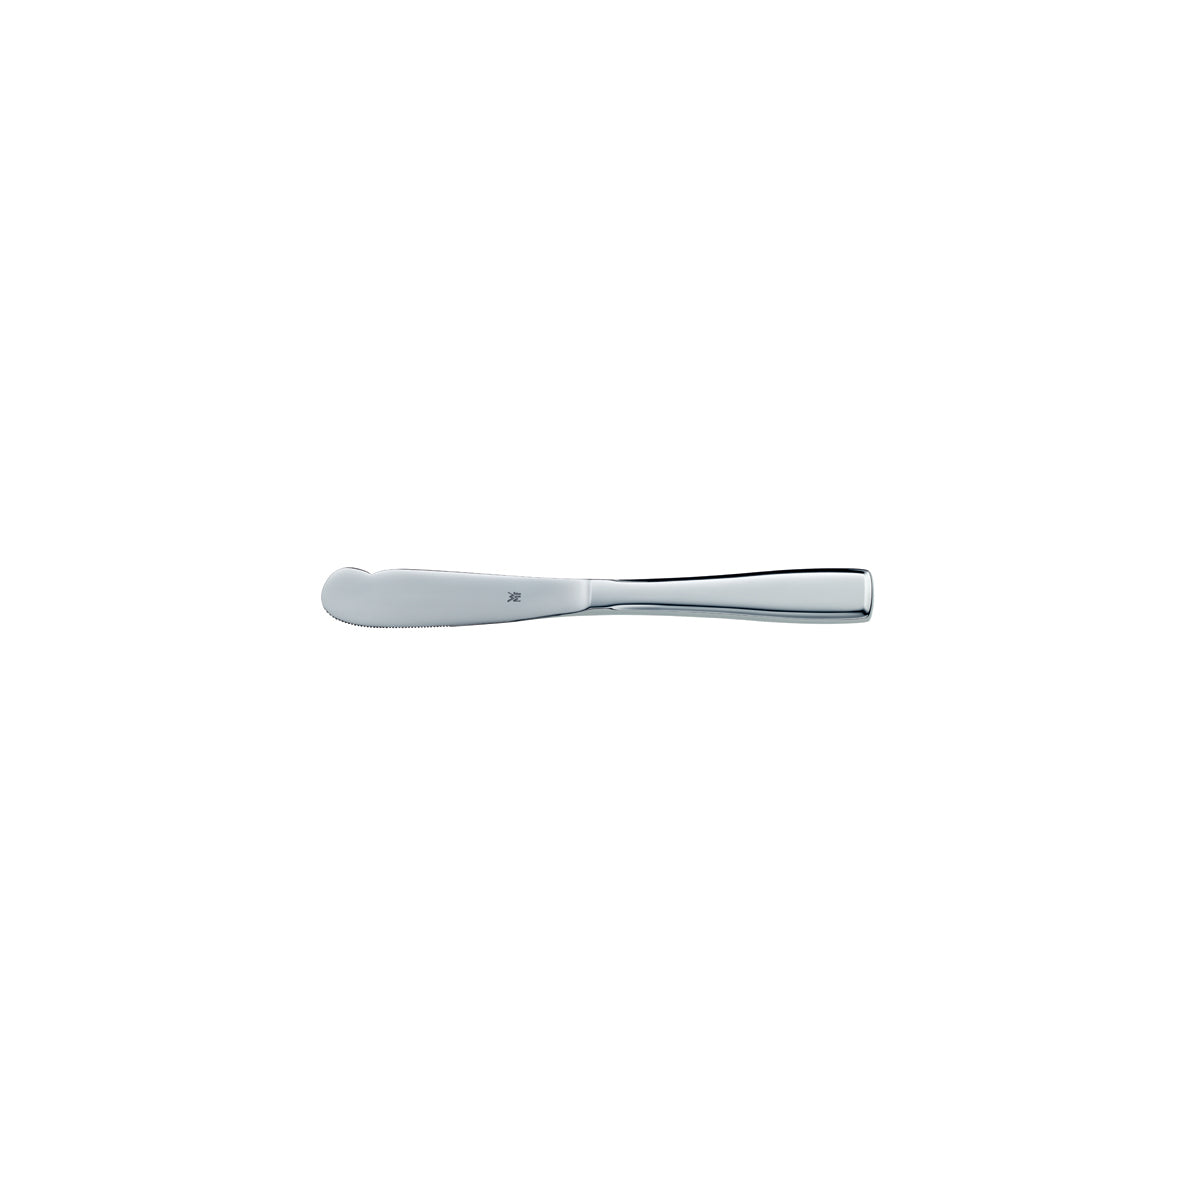 12.7966.6049 WMF Solid Butter Knife Stainless Steel Tomkin Australia Hospitality Supplies